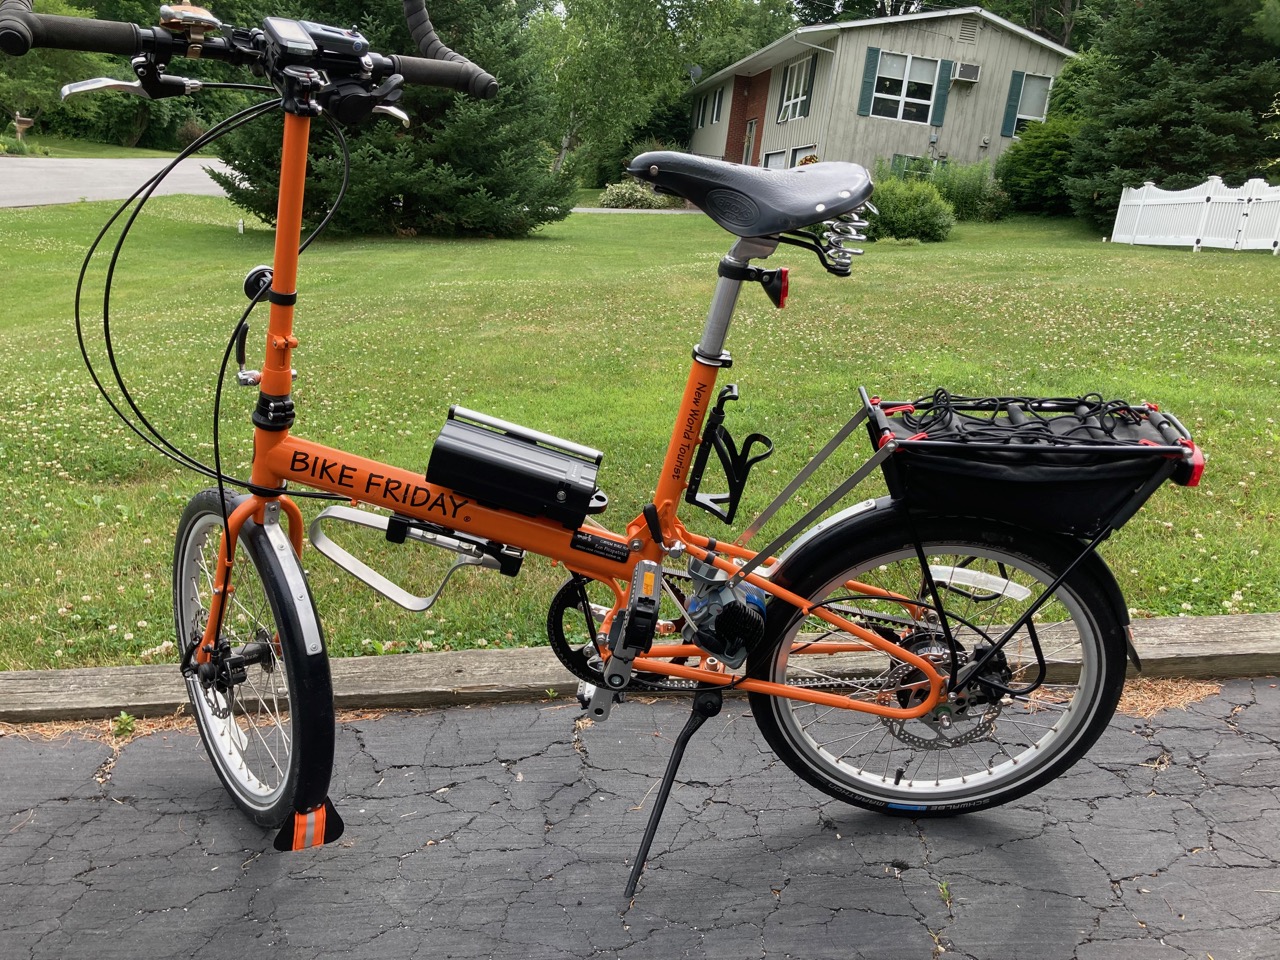 Review of OneMotor for Brompton